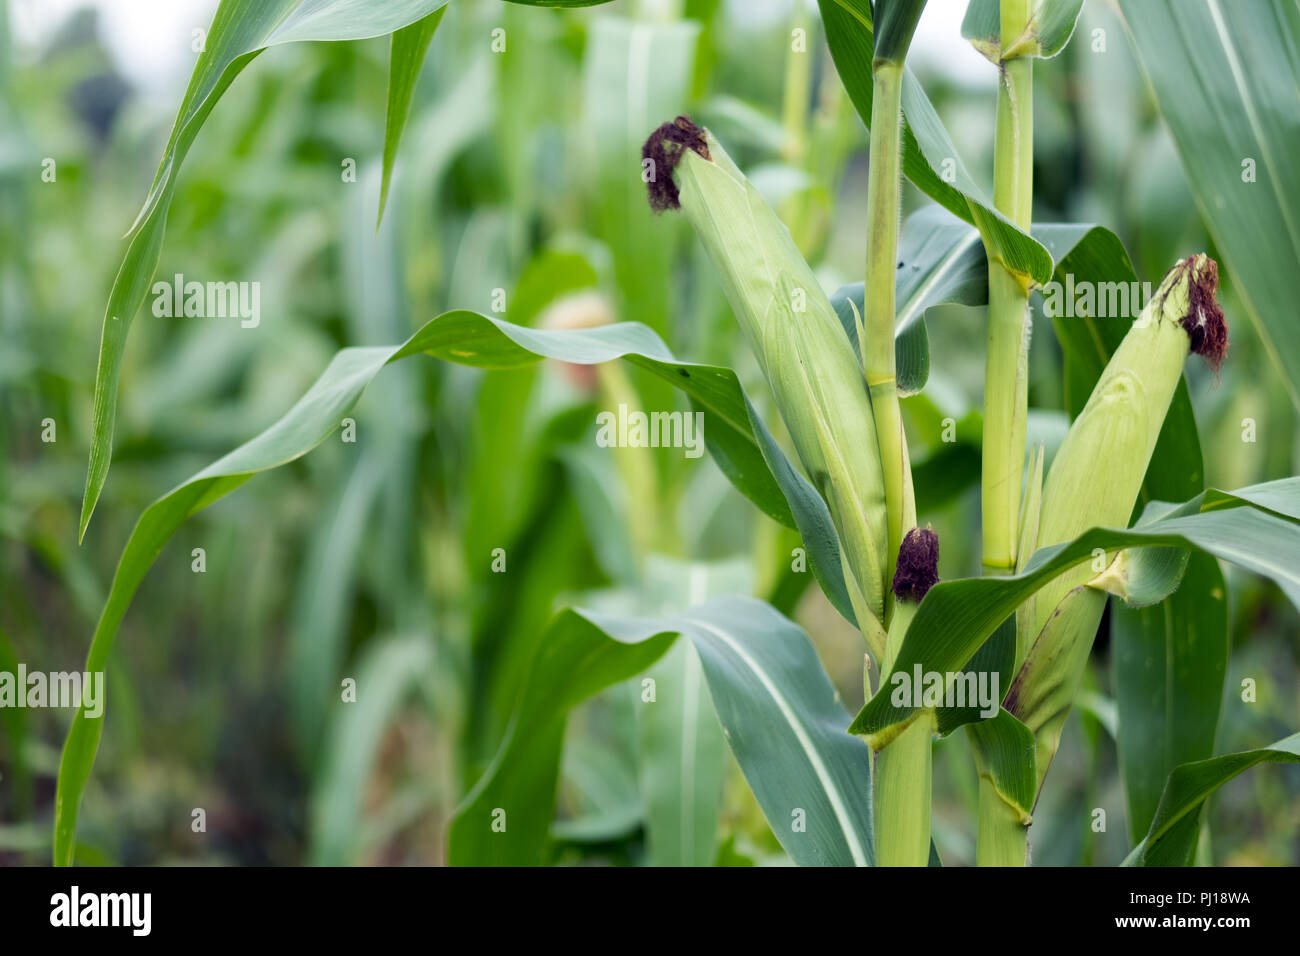 Sweet corn plant in the field Stock Photo